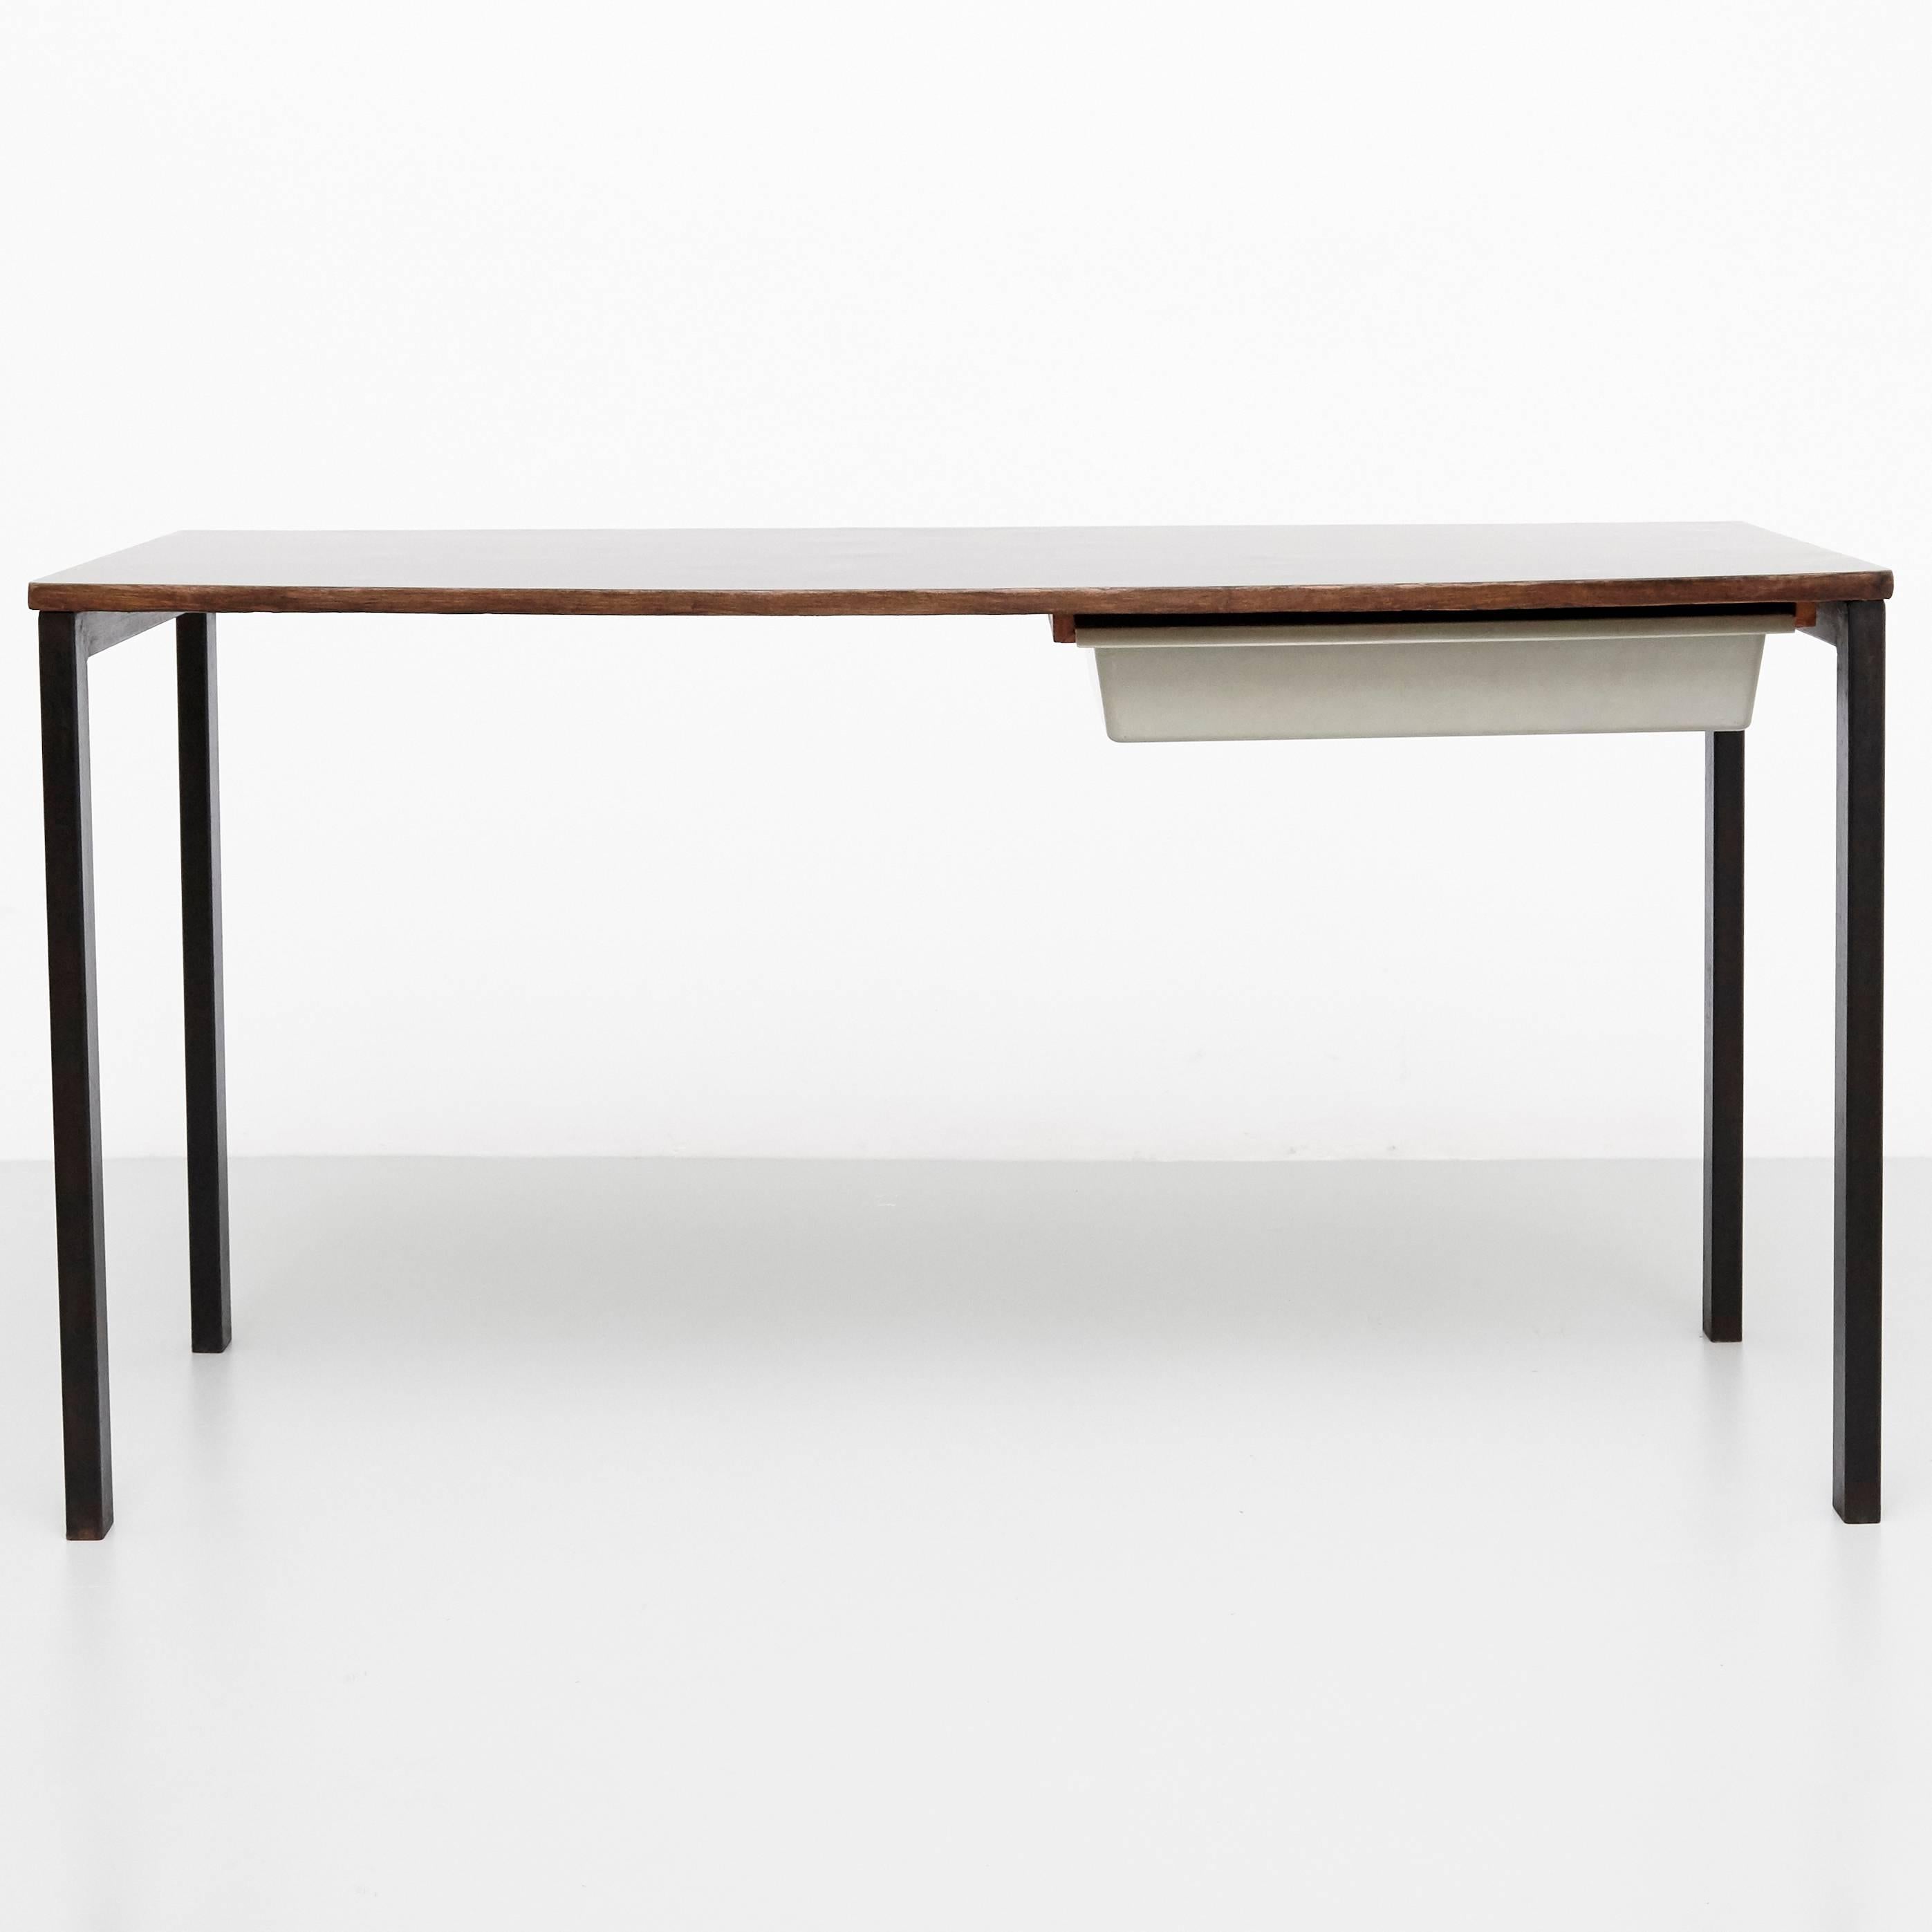 Console designed by Charlotte Perriand, circa 1958.
Manufactured in France, circa 1958.
Black laminated plastic-covered plywood, painted steel and grey moulded plastic.

 Drawer moulded with Modele Charlotte Perriand or Brevete S.G.D.G.

In